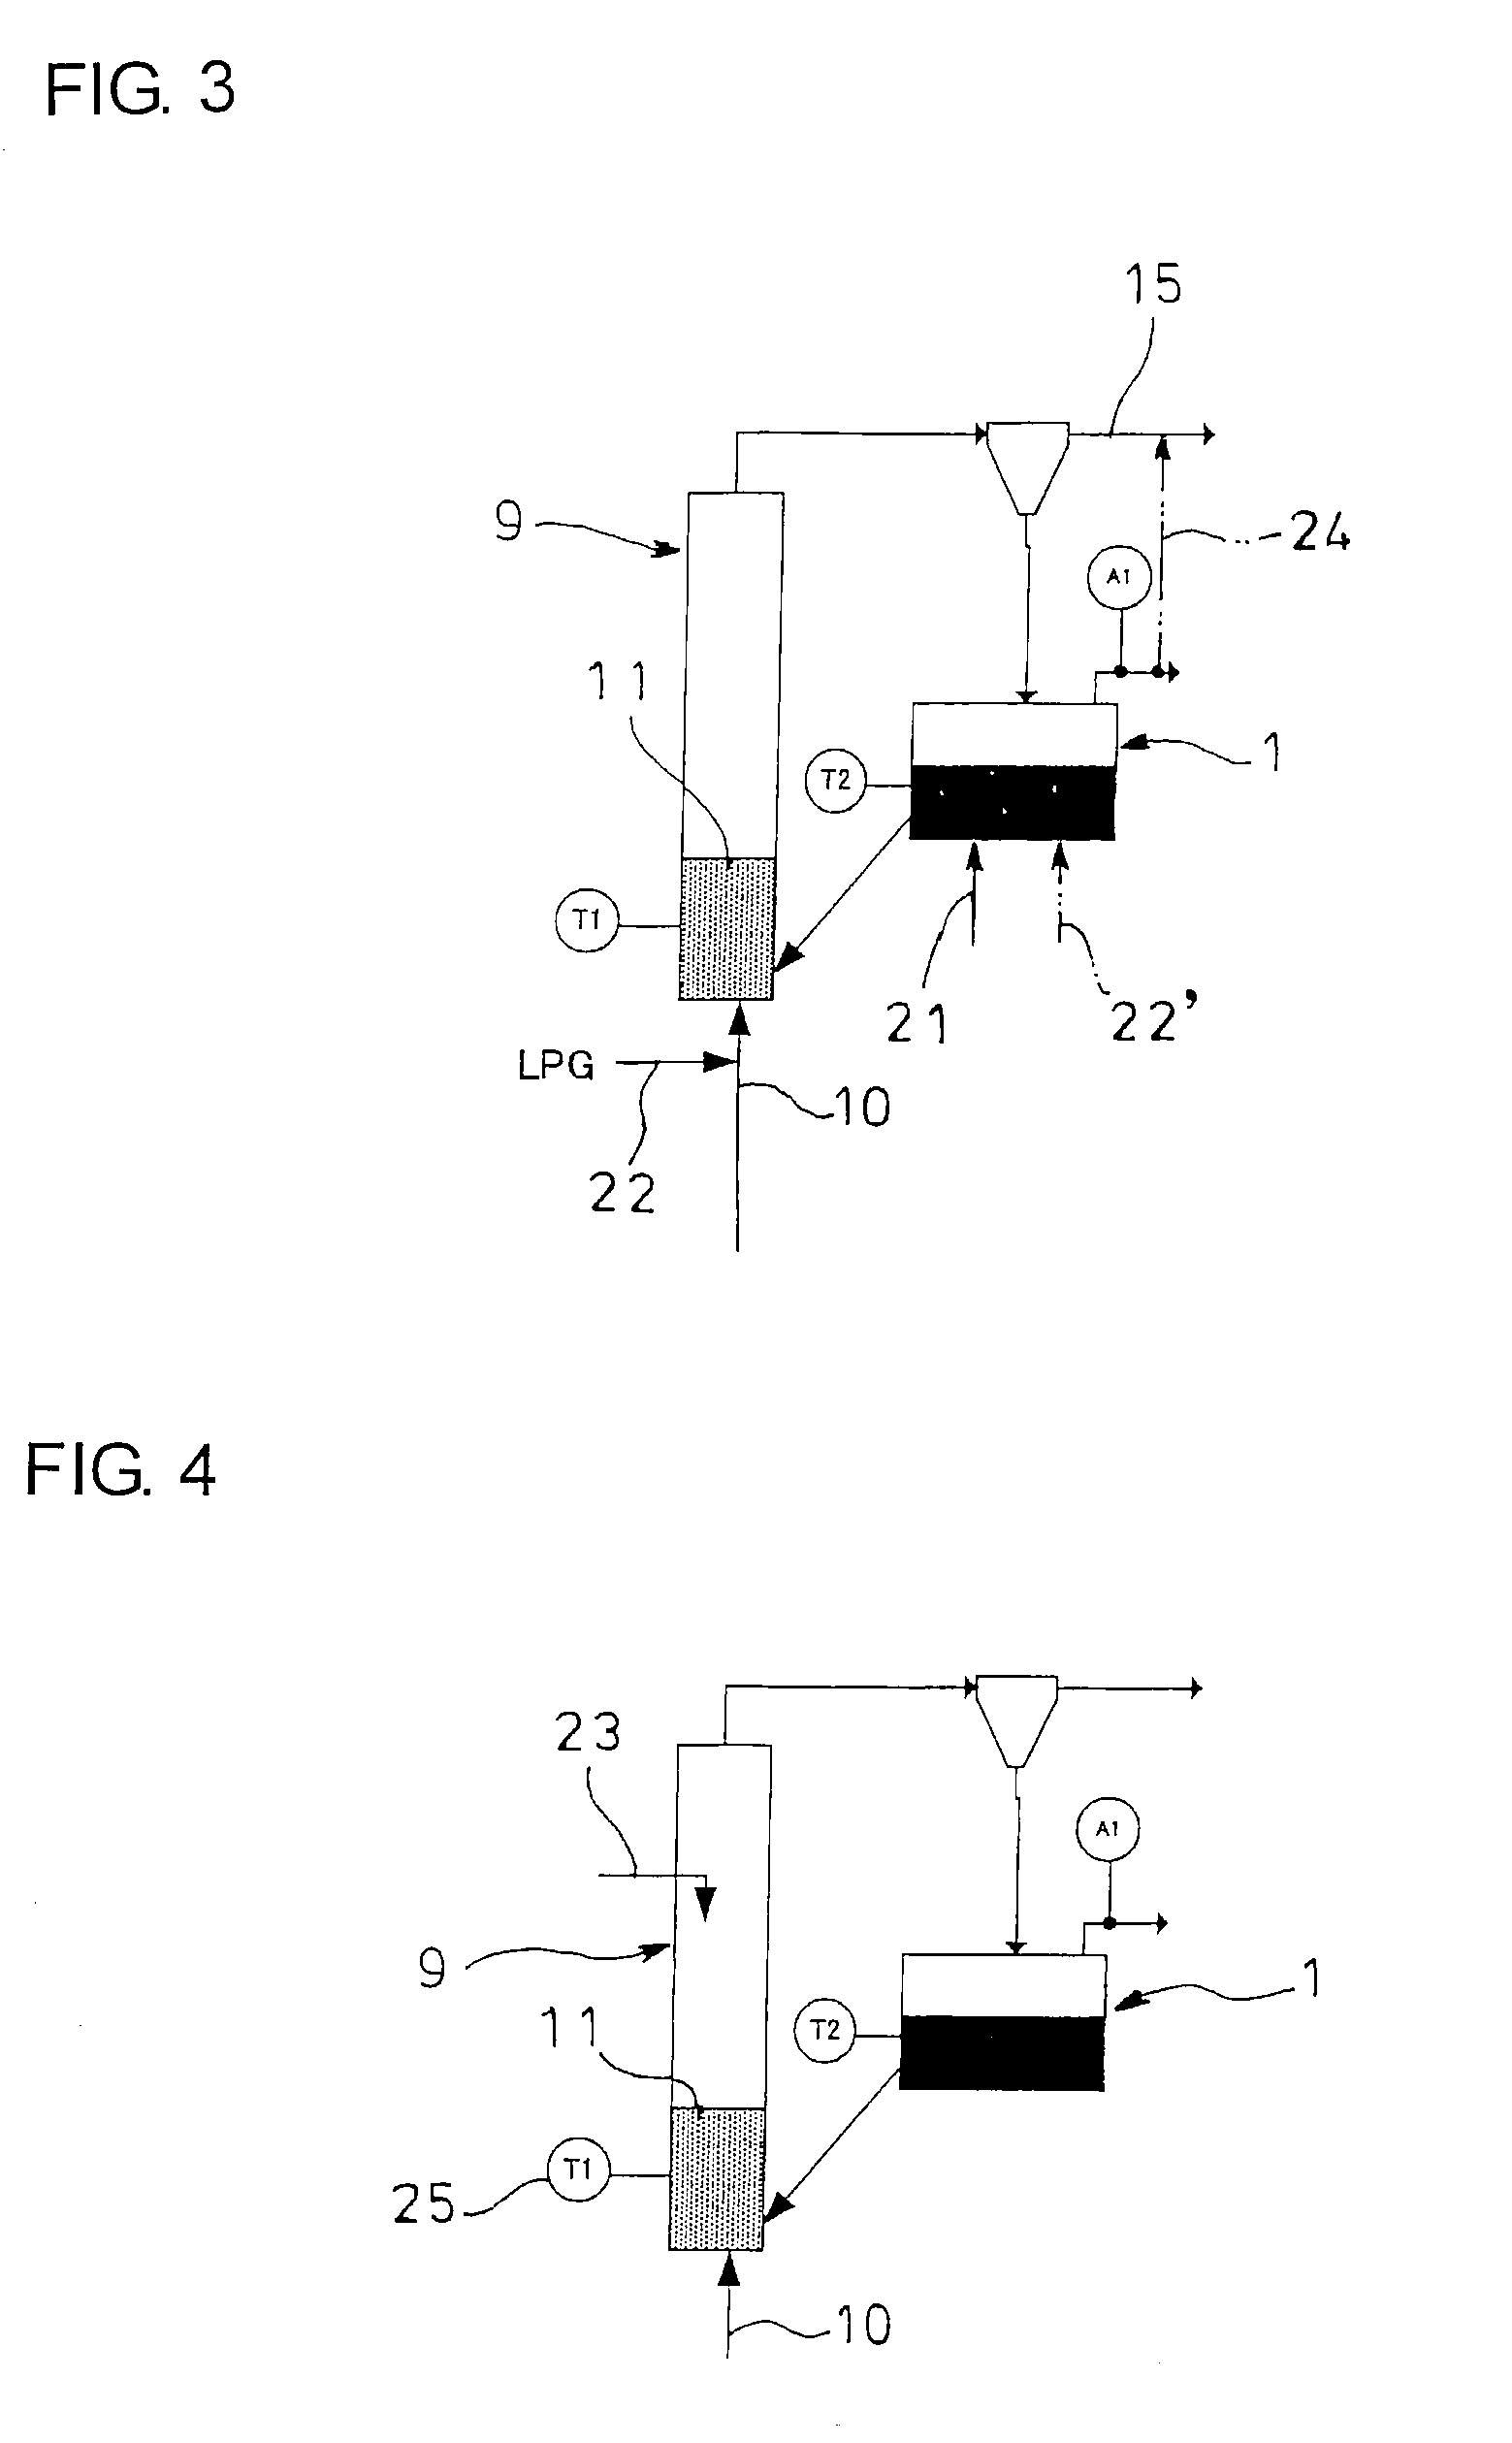 Method of operating gasification facility